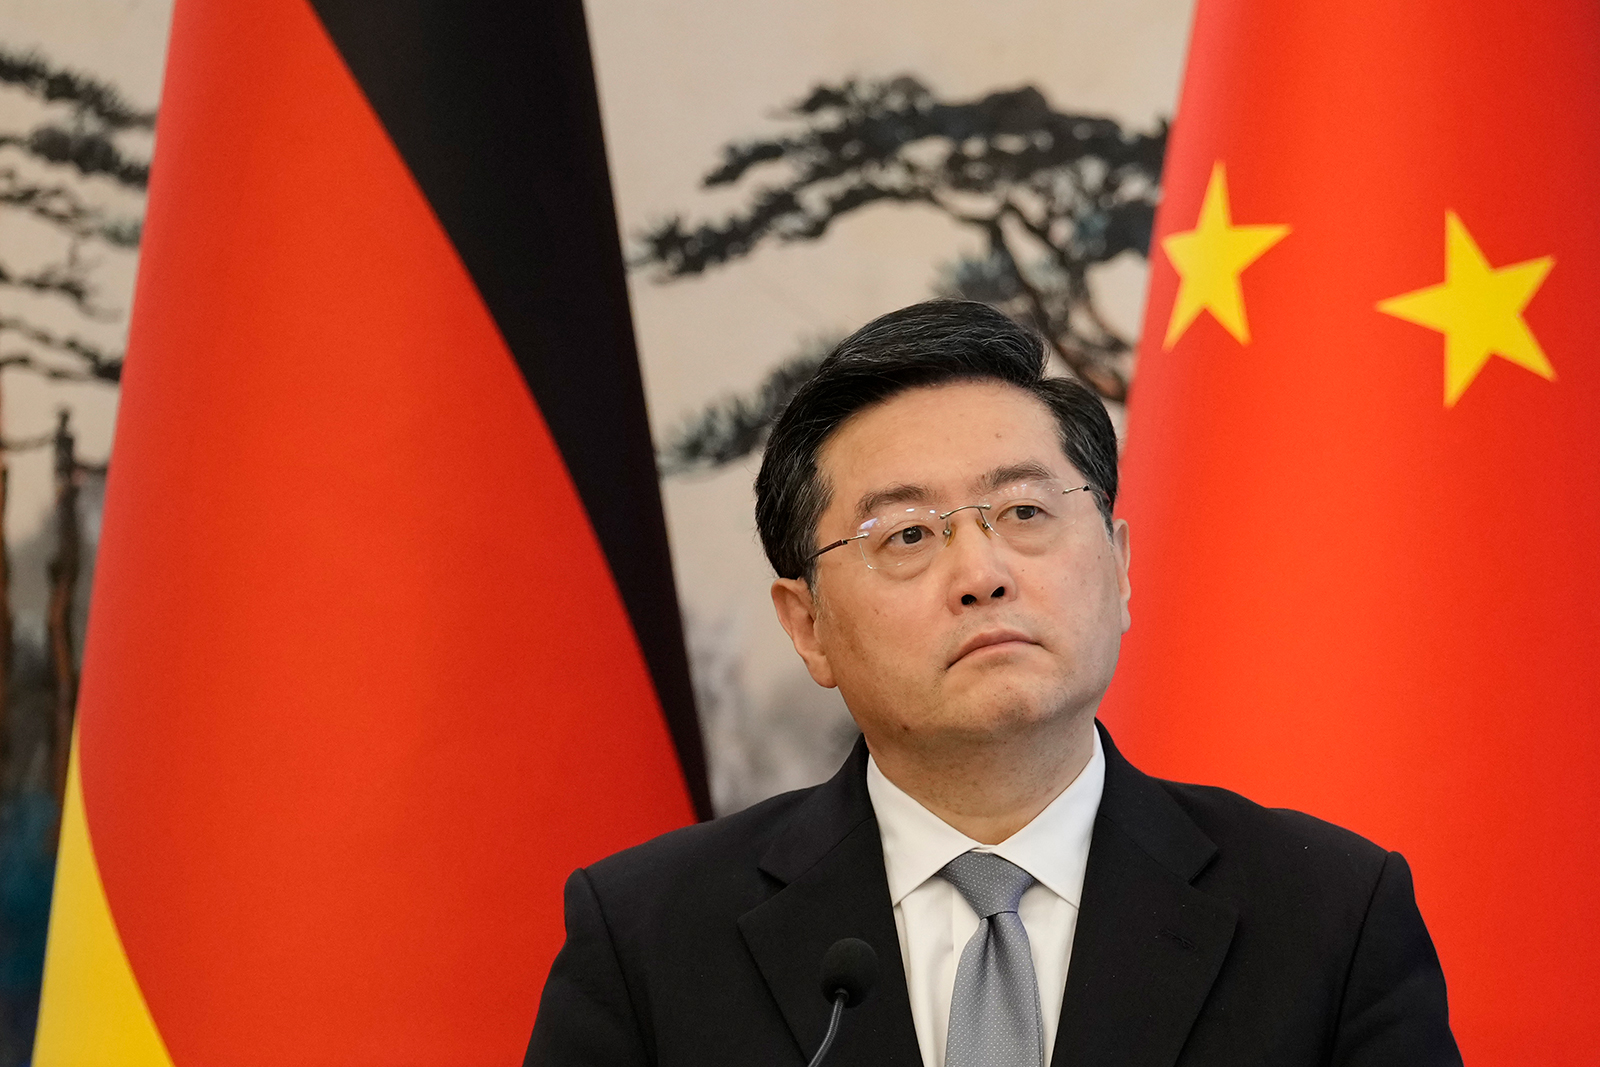 Chinese Foreign Minister Qin Gang speaks during a news conference in Beijing on April 14.